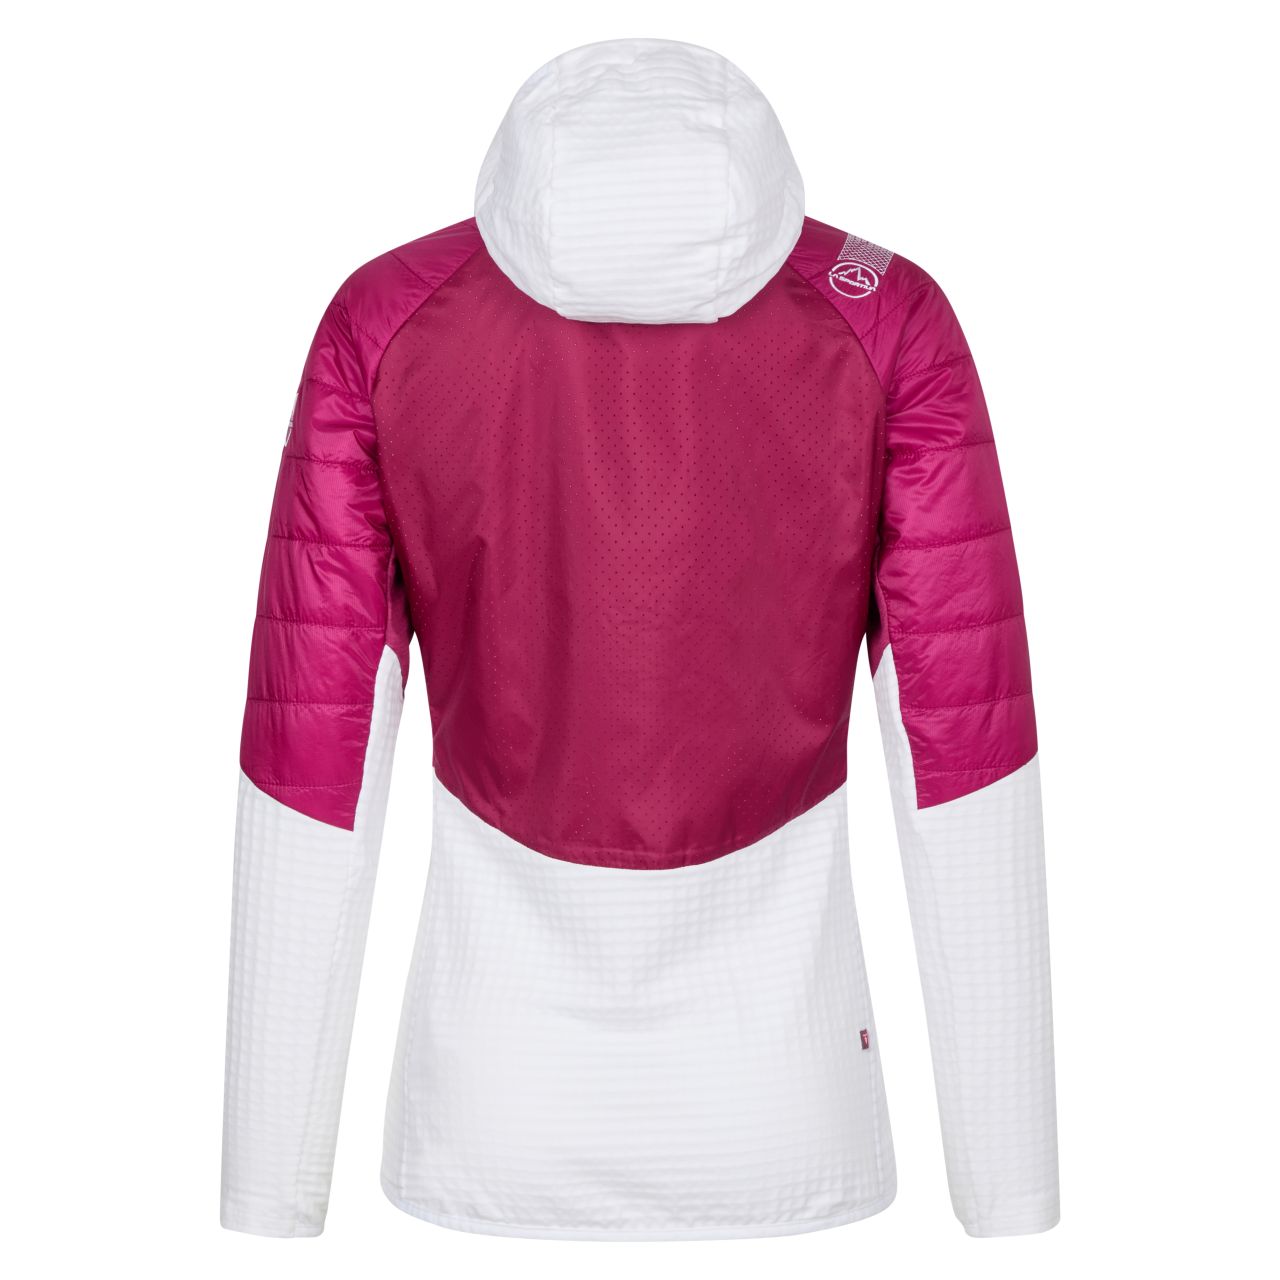 Cambrenas 2.0 Hybrid Jacket Woman Red Plum/White